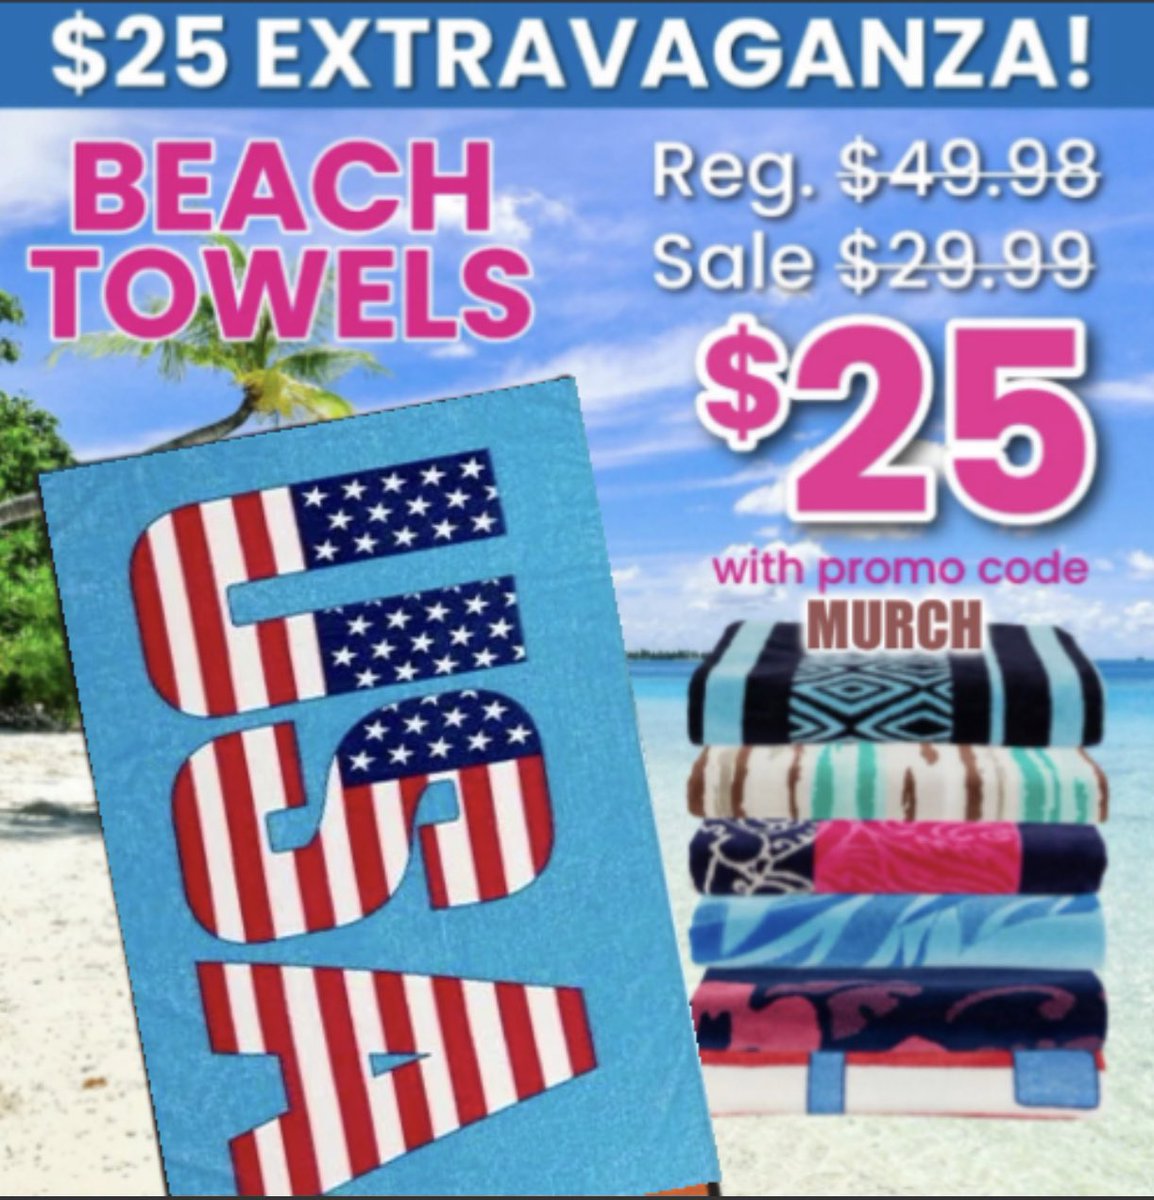 🇺🇸Patriots, Summer is almost here! The best high quality beach towels on sale now! Free shipping on orders over $75. Support a great Patriot like Mike & his company. 👉Use Promo 'MURCH' Call or click 👇 800-684-5482 mypillow.com/murch 800-950-2917 mystore.com/murch